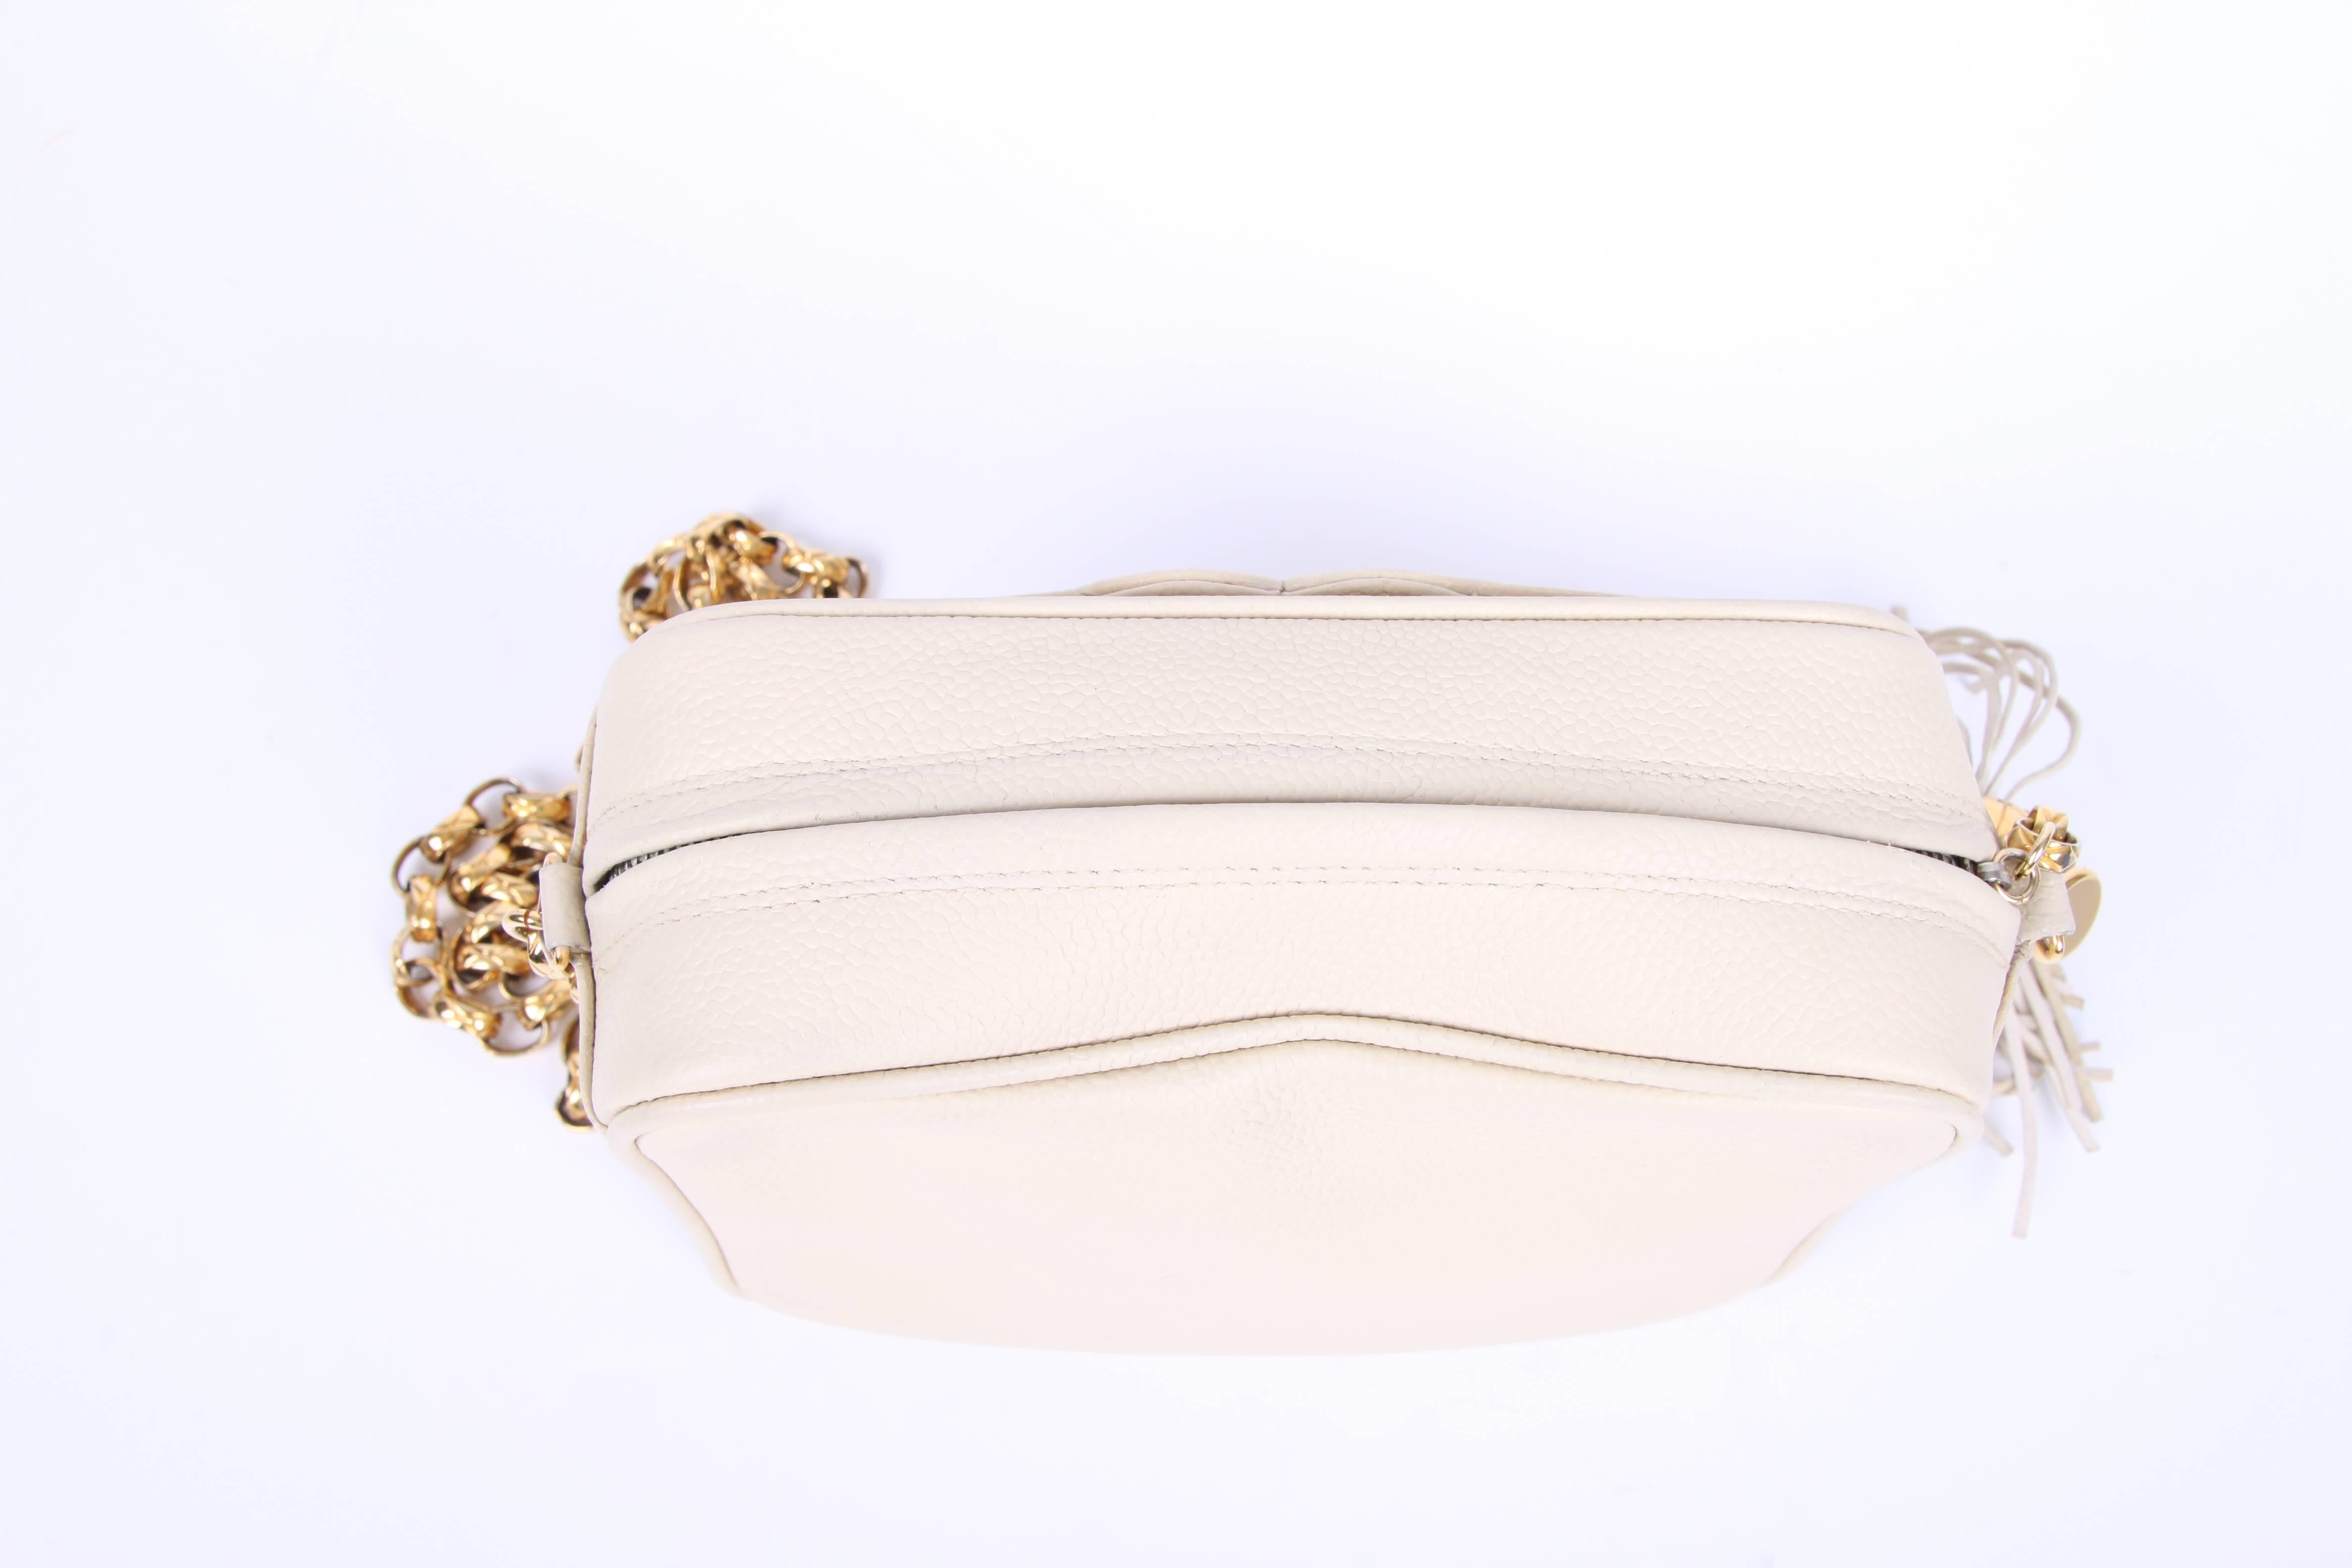 1995/1996 Vintage Chanel Camera Bag - ivory leather In Fair Condition For Sale In Baarn, NL